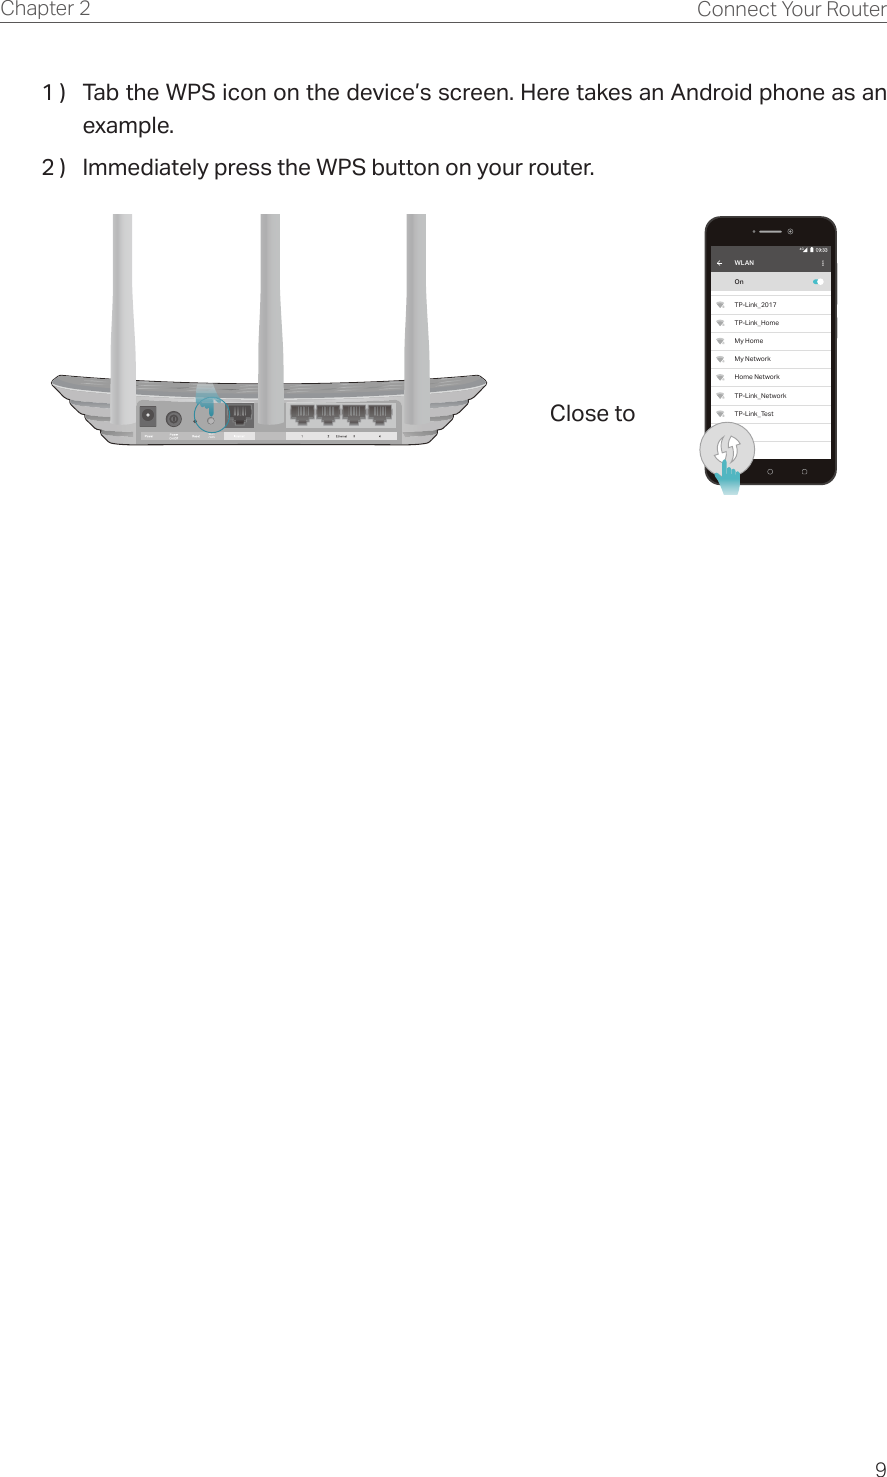 9Chapter 2 Connect Your Router1 )  Tab the WPS icon on the device’s screen. Here takes an Android phone as an example.2 )  Immediately press the WPS button on your router.Wi-Fi/WPSWLANOnTP-Link_2017TP-Link_HomeMy HomeMy NetworkHome NetworkTP-Link_NetworkTP-Link_Test4GClose to 